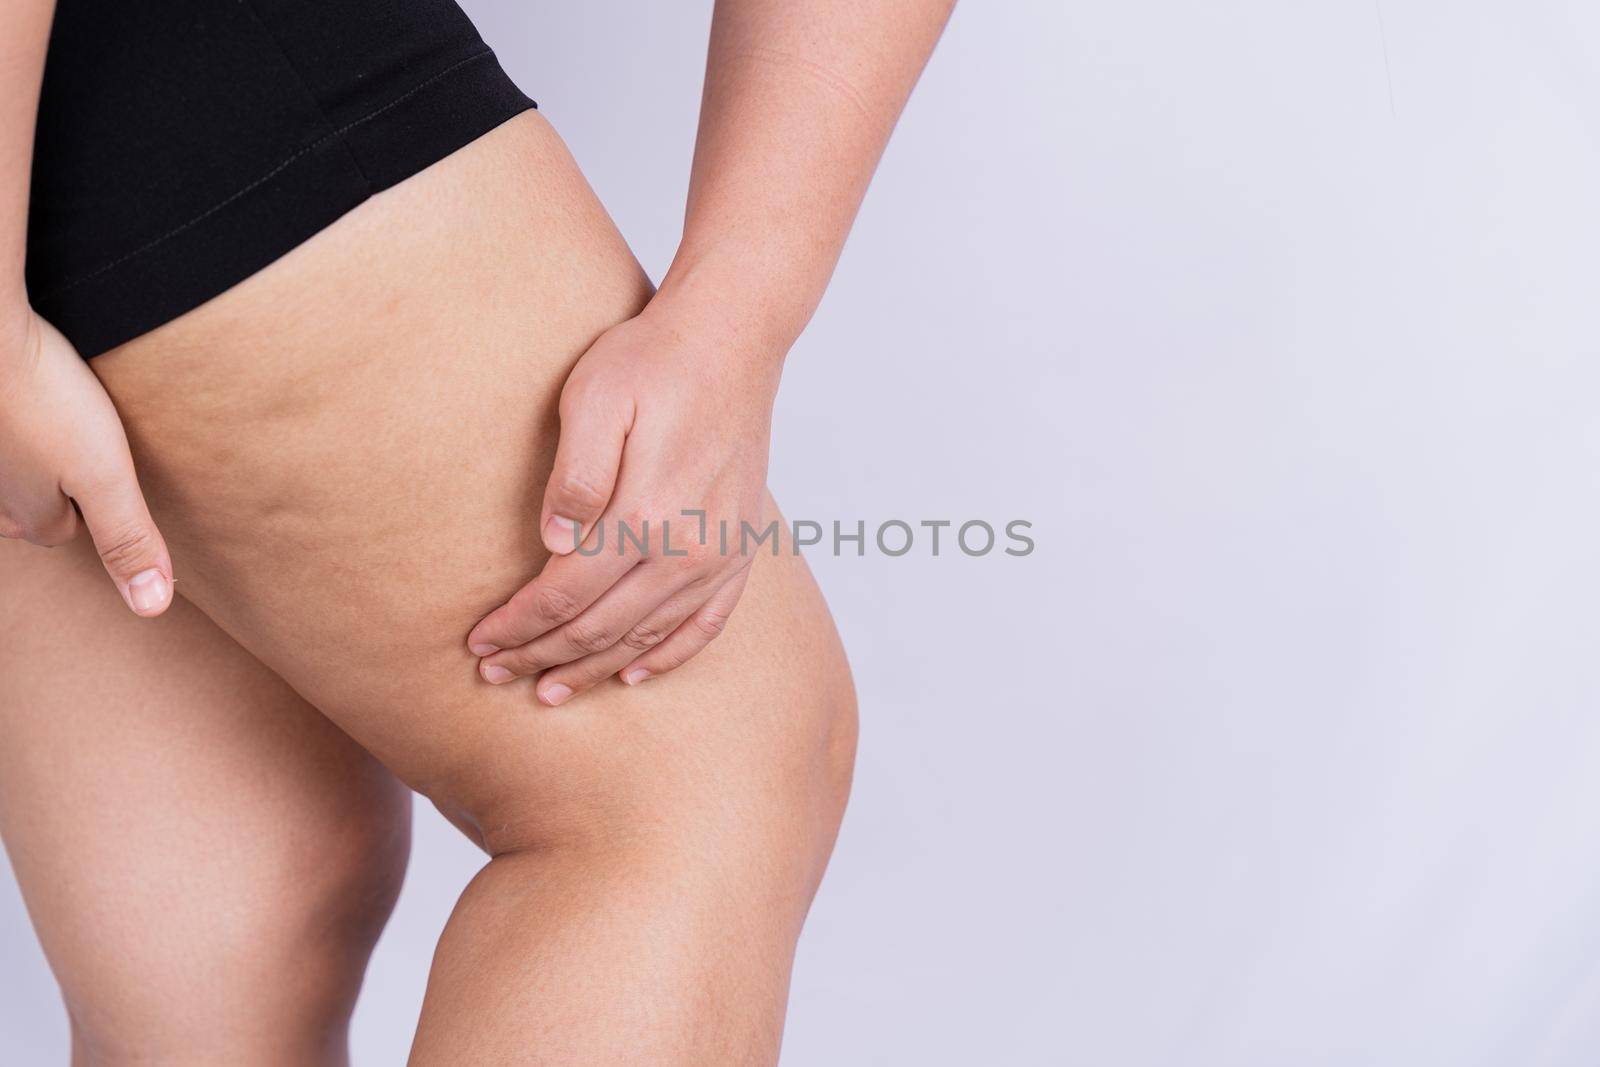 Female holding and pushing the skin of the legs cellulite or orange peel. Treatment and disposal of excess weight, the deposition of subcutaneous fat tissue by mikesaran